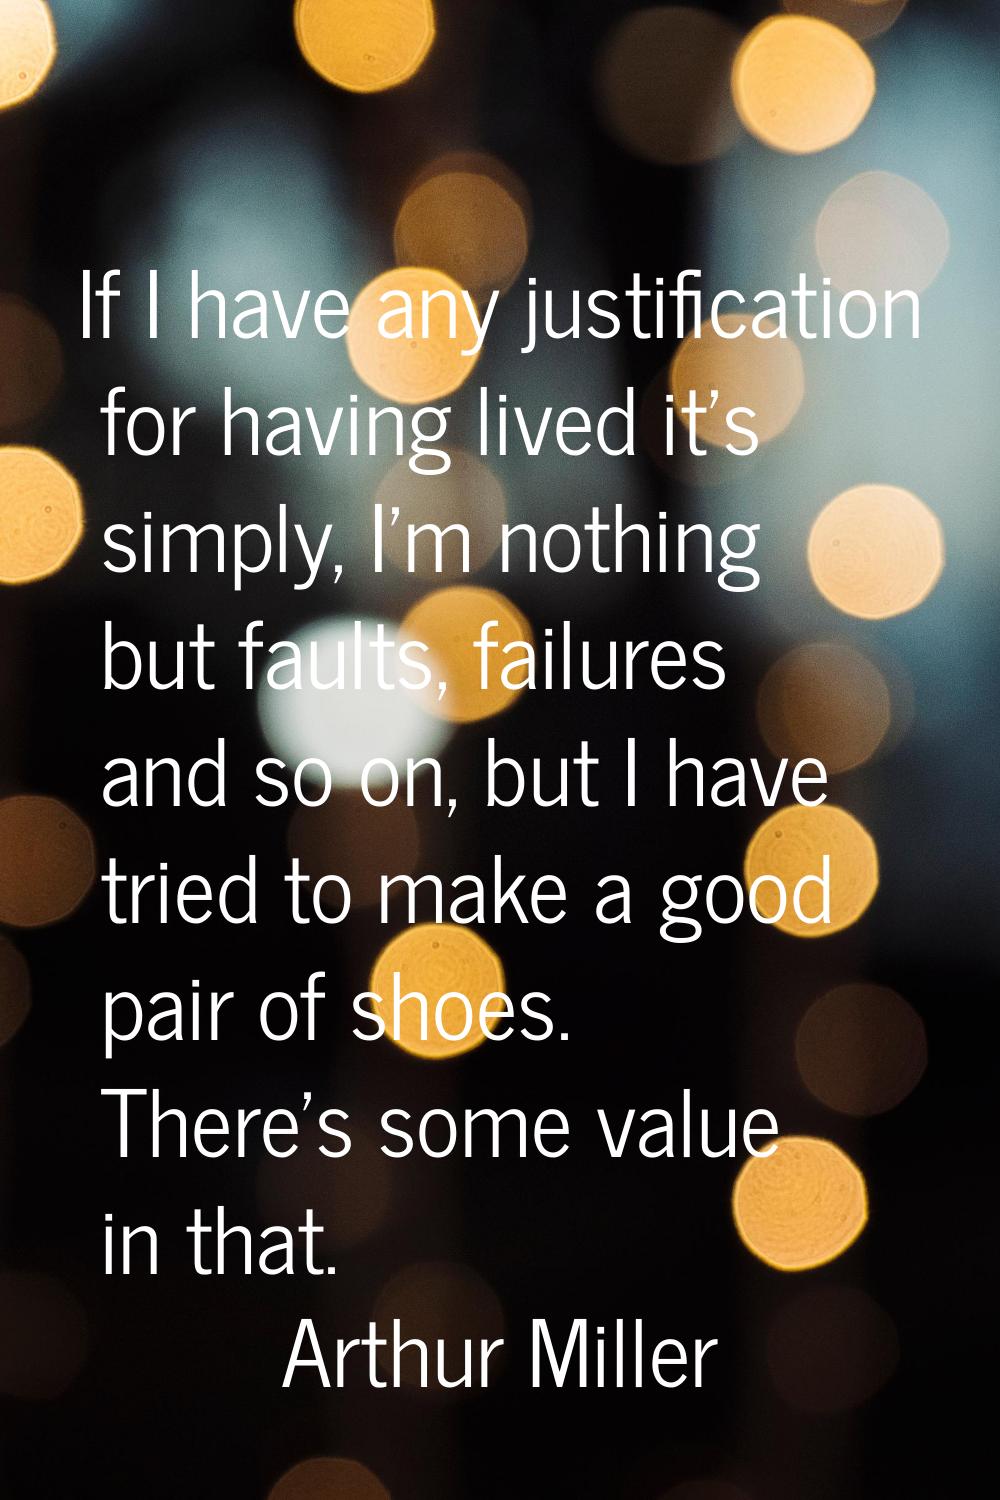 If I have any justification for having lived it's simply, I'm nothing but faults, failures and so o